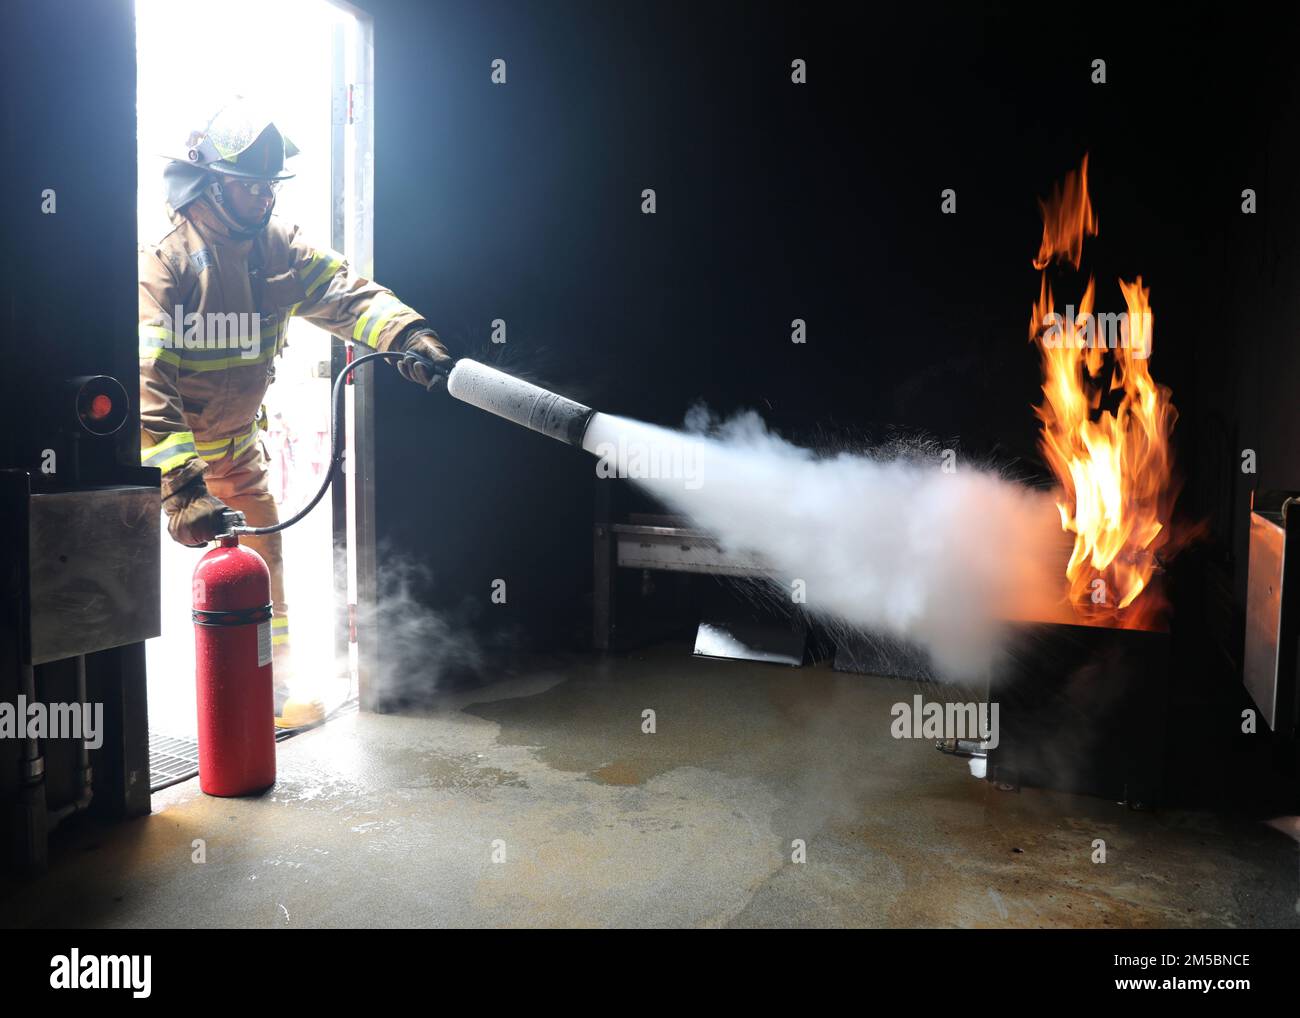 220223-N-OH262-0015--FORT EUSTIS, Va. (February 23, 2022)--A newly hired Civil Service Mariner (CIVMAR) uses a CO2 fire extinguisher to put out a simulated trash can fire at the Military Sealift Command Training Center East on Joint Base Langley-Fort Eustis, Virginia, Feb. 25. The training evolution was part of the MSC Basic Training Damage Control curriculum, which must be successfully completed prior to sailing in MSC's fleet of ships. Stock Photo